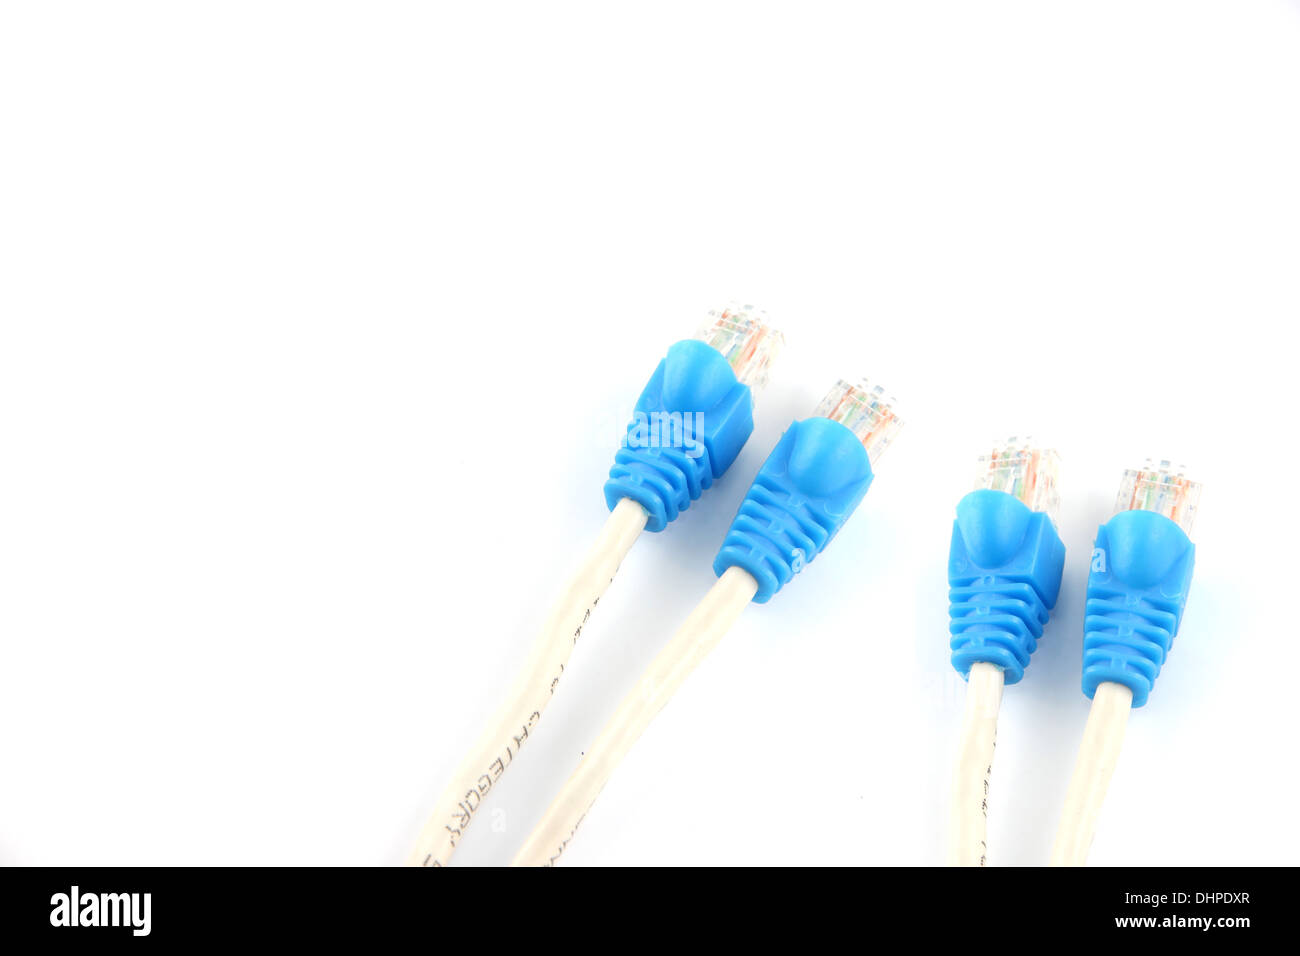 The Picture of Blue LAN Cables. Stock Photo